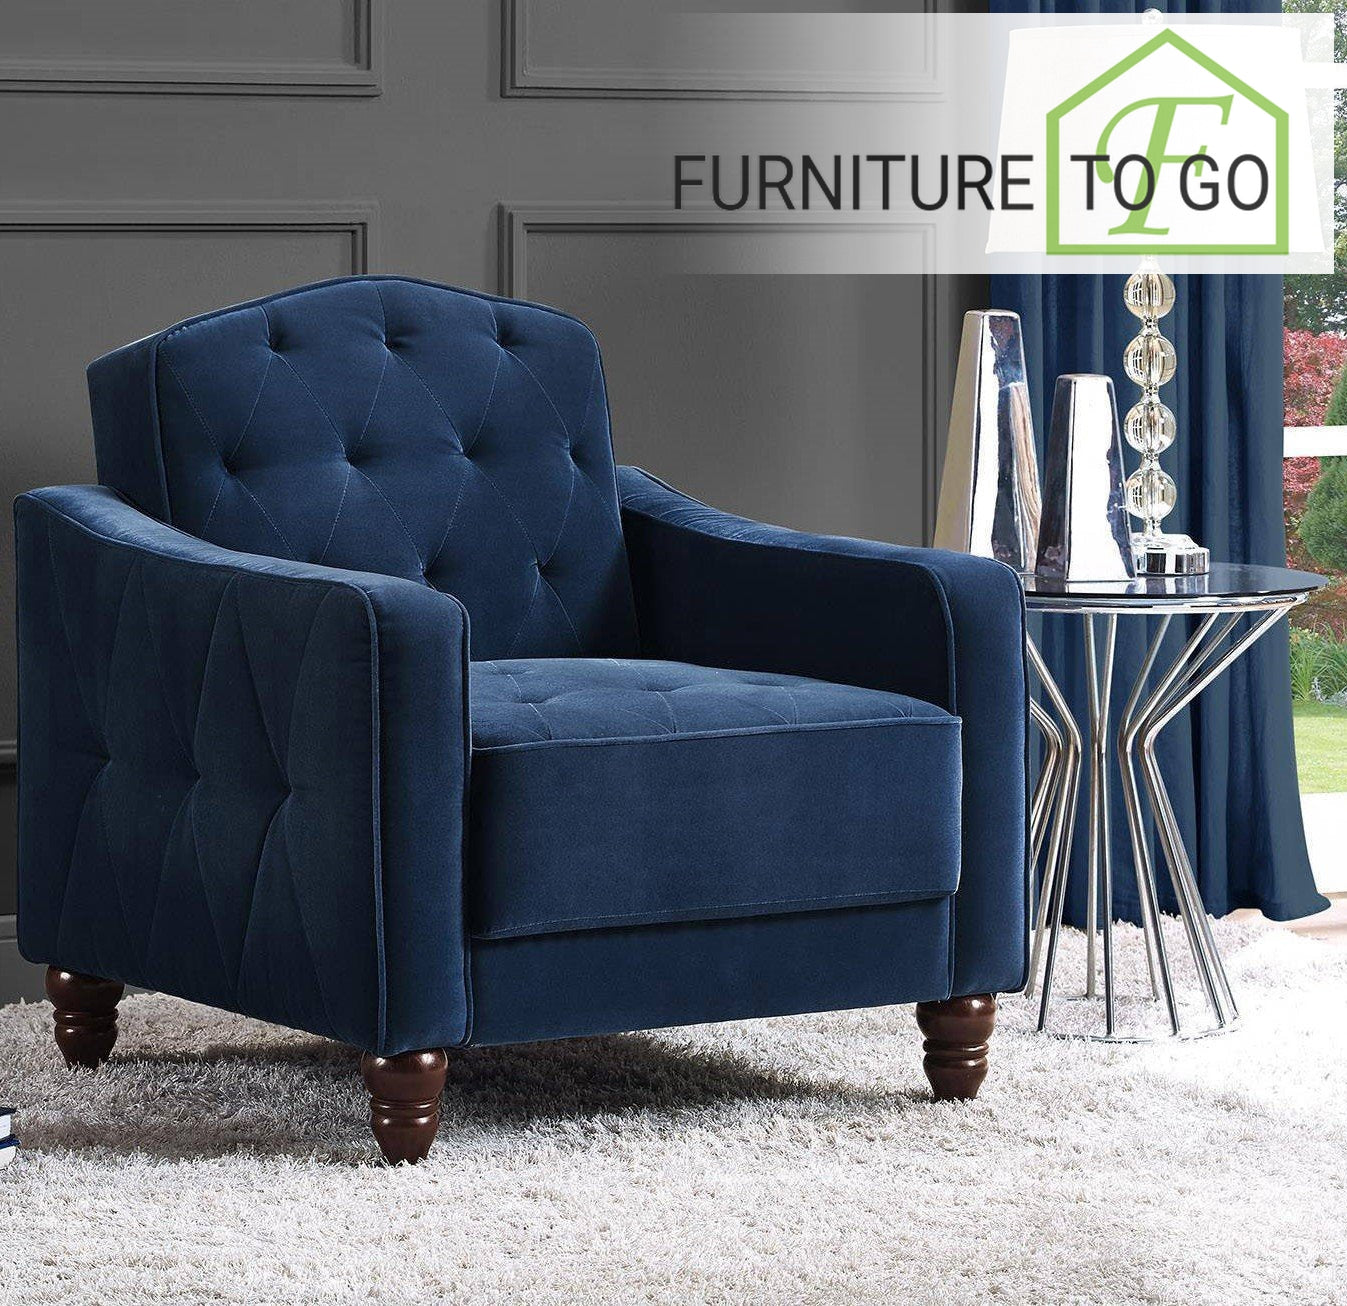 Clearance Furniture In Dallas 180 00 Navy Vintage Furniture To